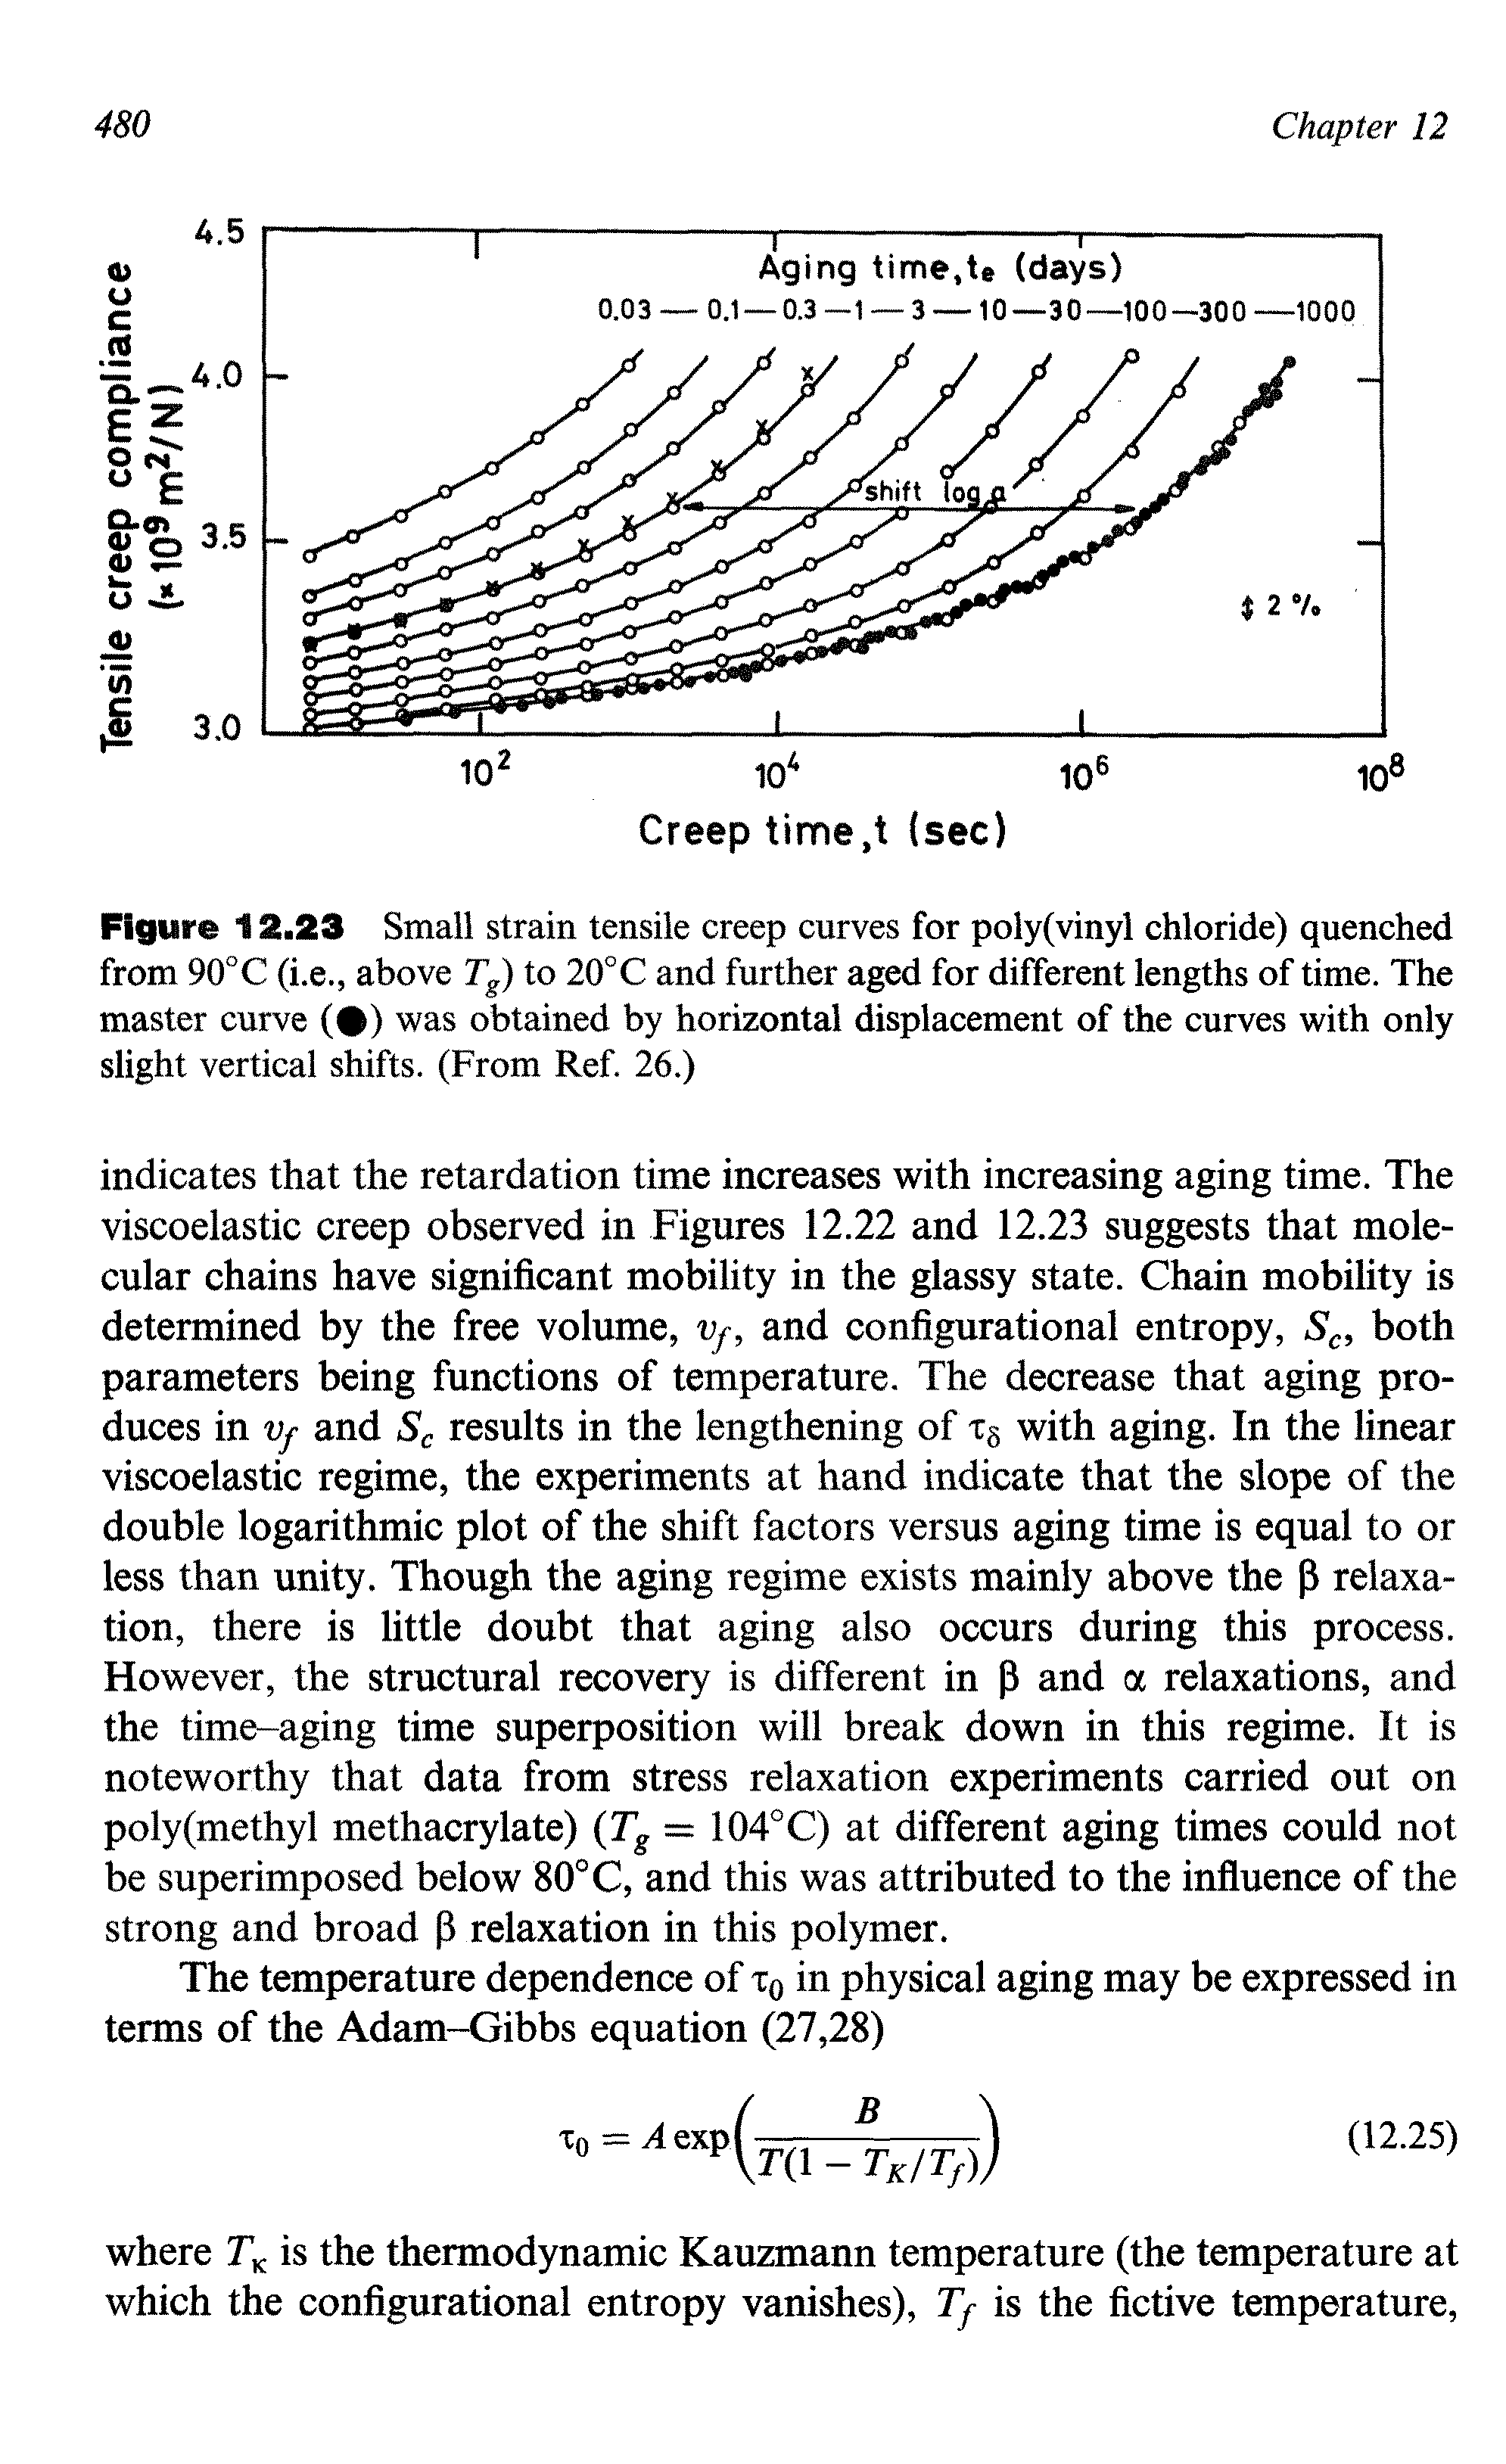 Figure 12.23 Small strain tensile creep curves for poly(vinyl chloride) quenched from 90°C (i.e., above Tg) to 20°C and further aged for different lengths of time. The master curve ( ) was obtained by horizontal displacement of the curves with only slight vertical shifts. (From Ref. 26.)...